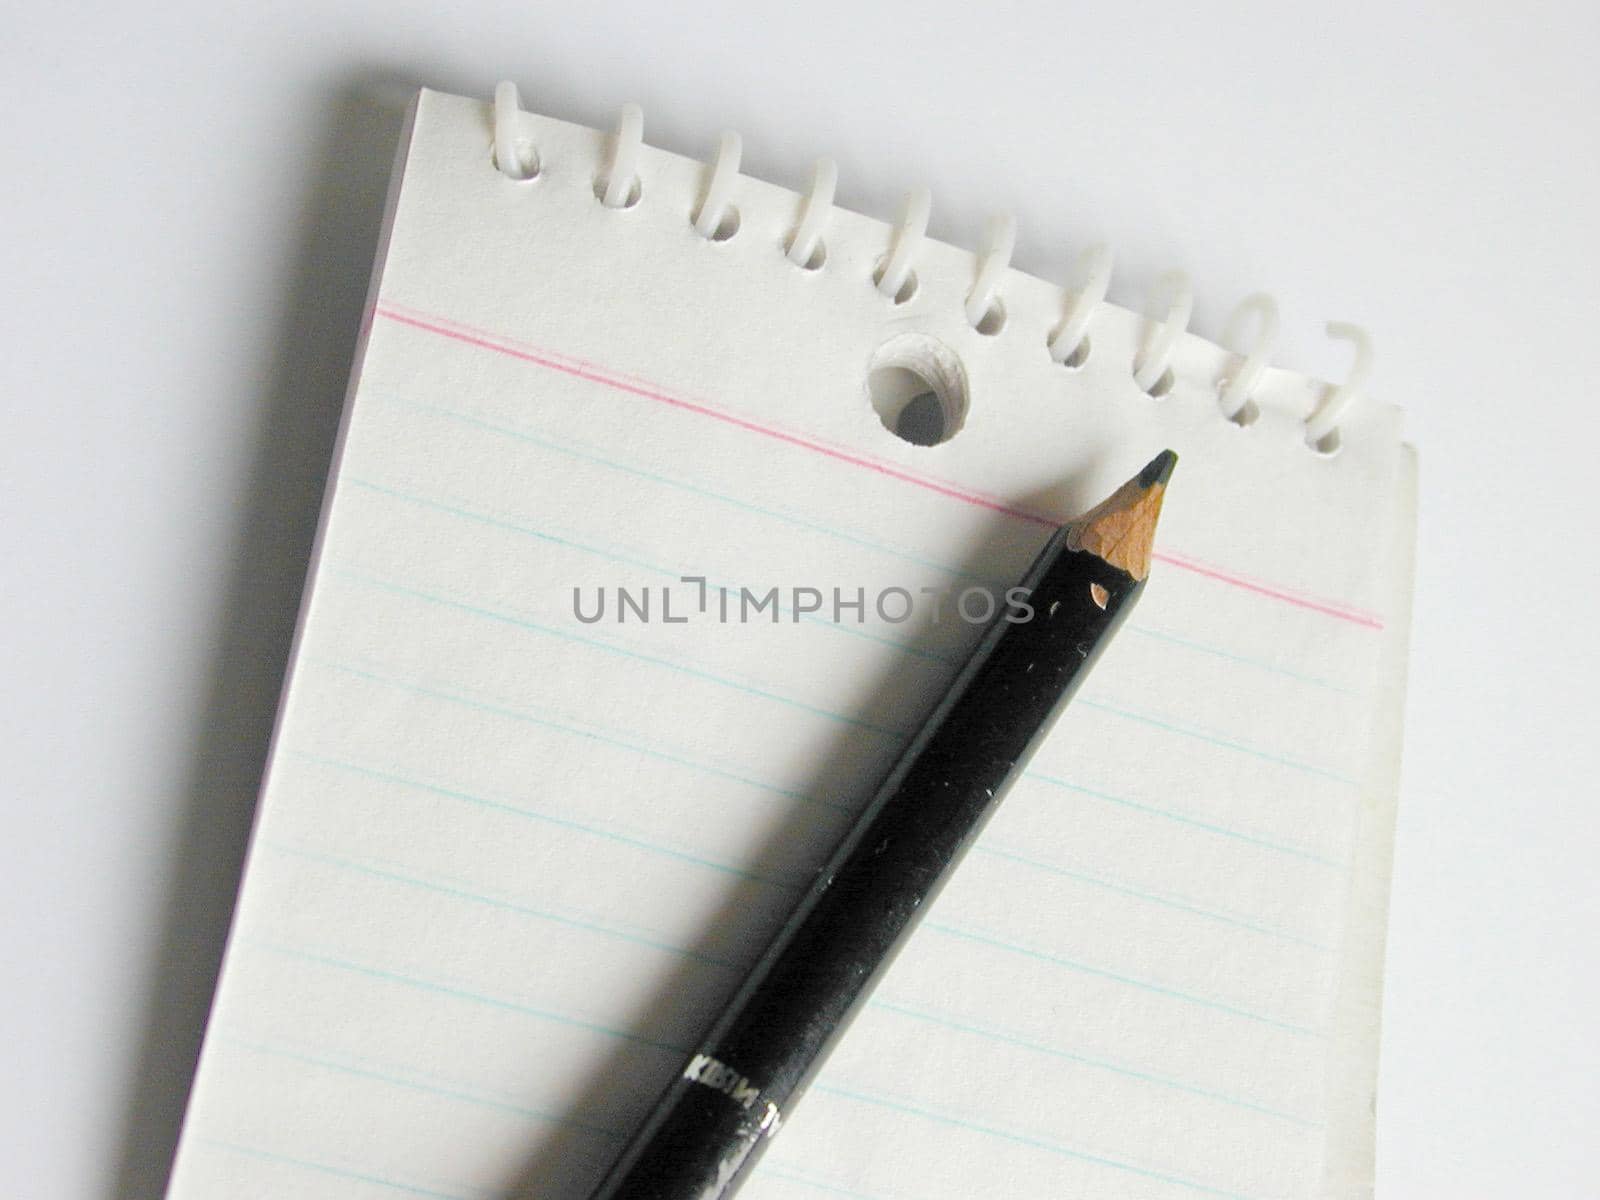 Close up view of short black pencil placed on a blank lined notepad against a white background